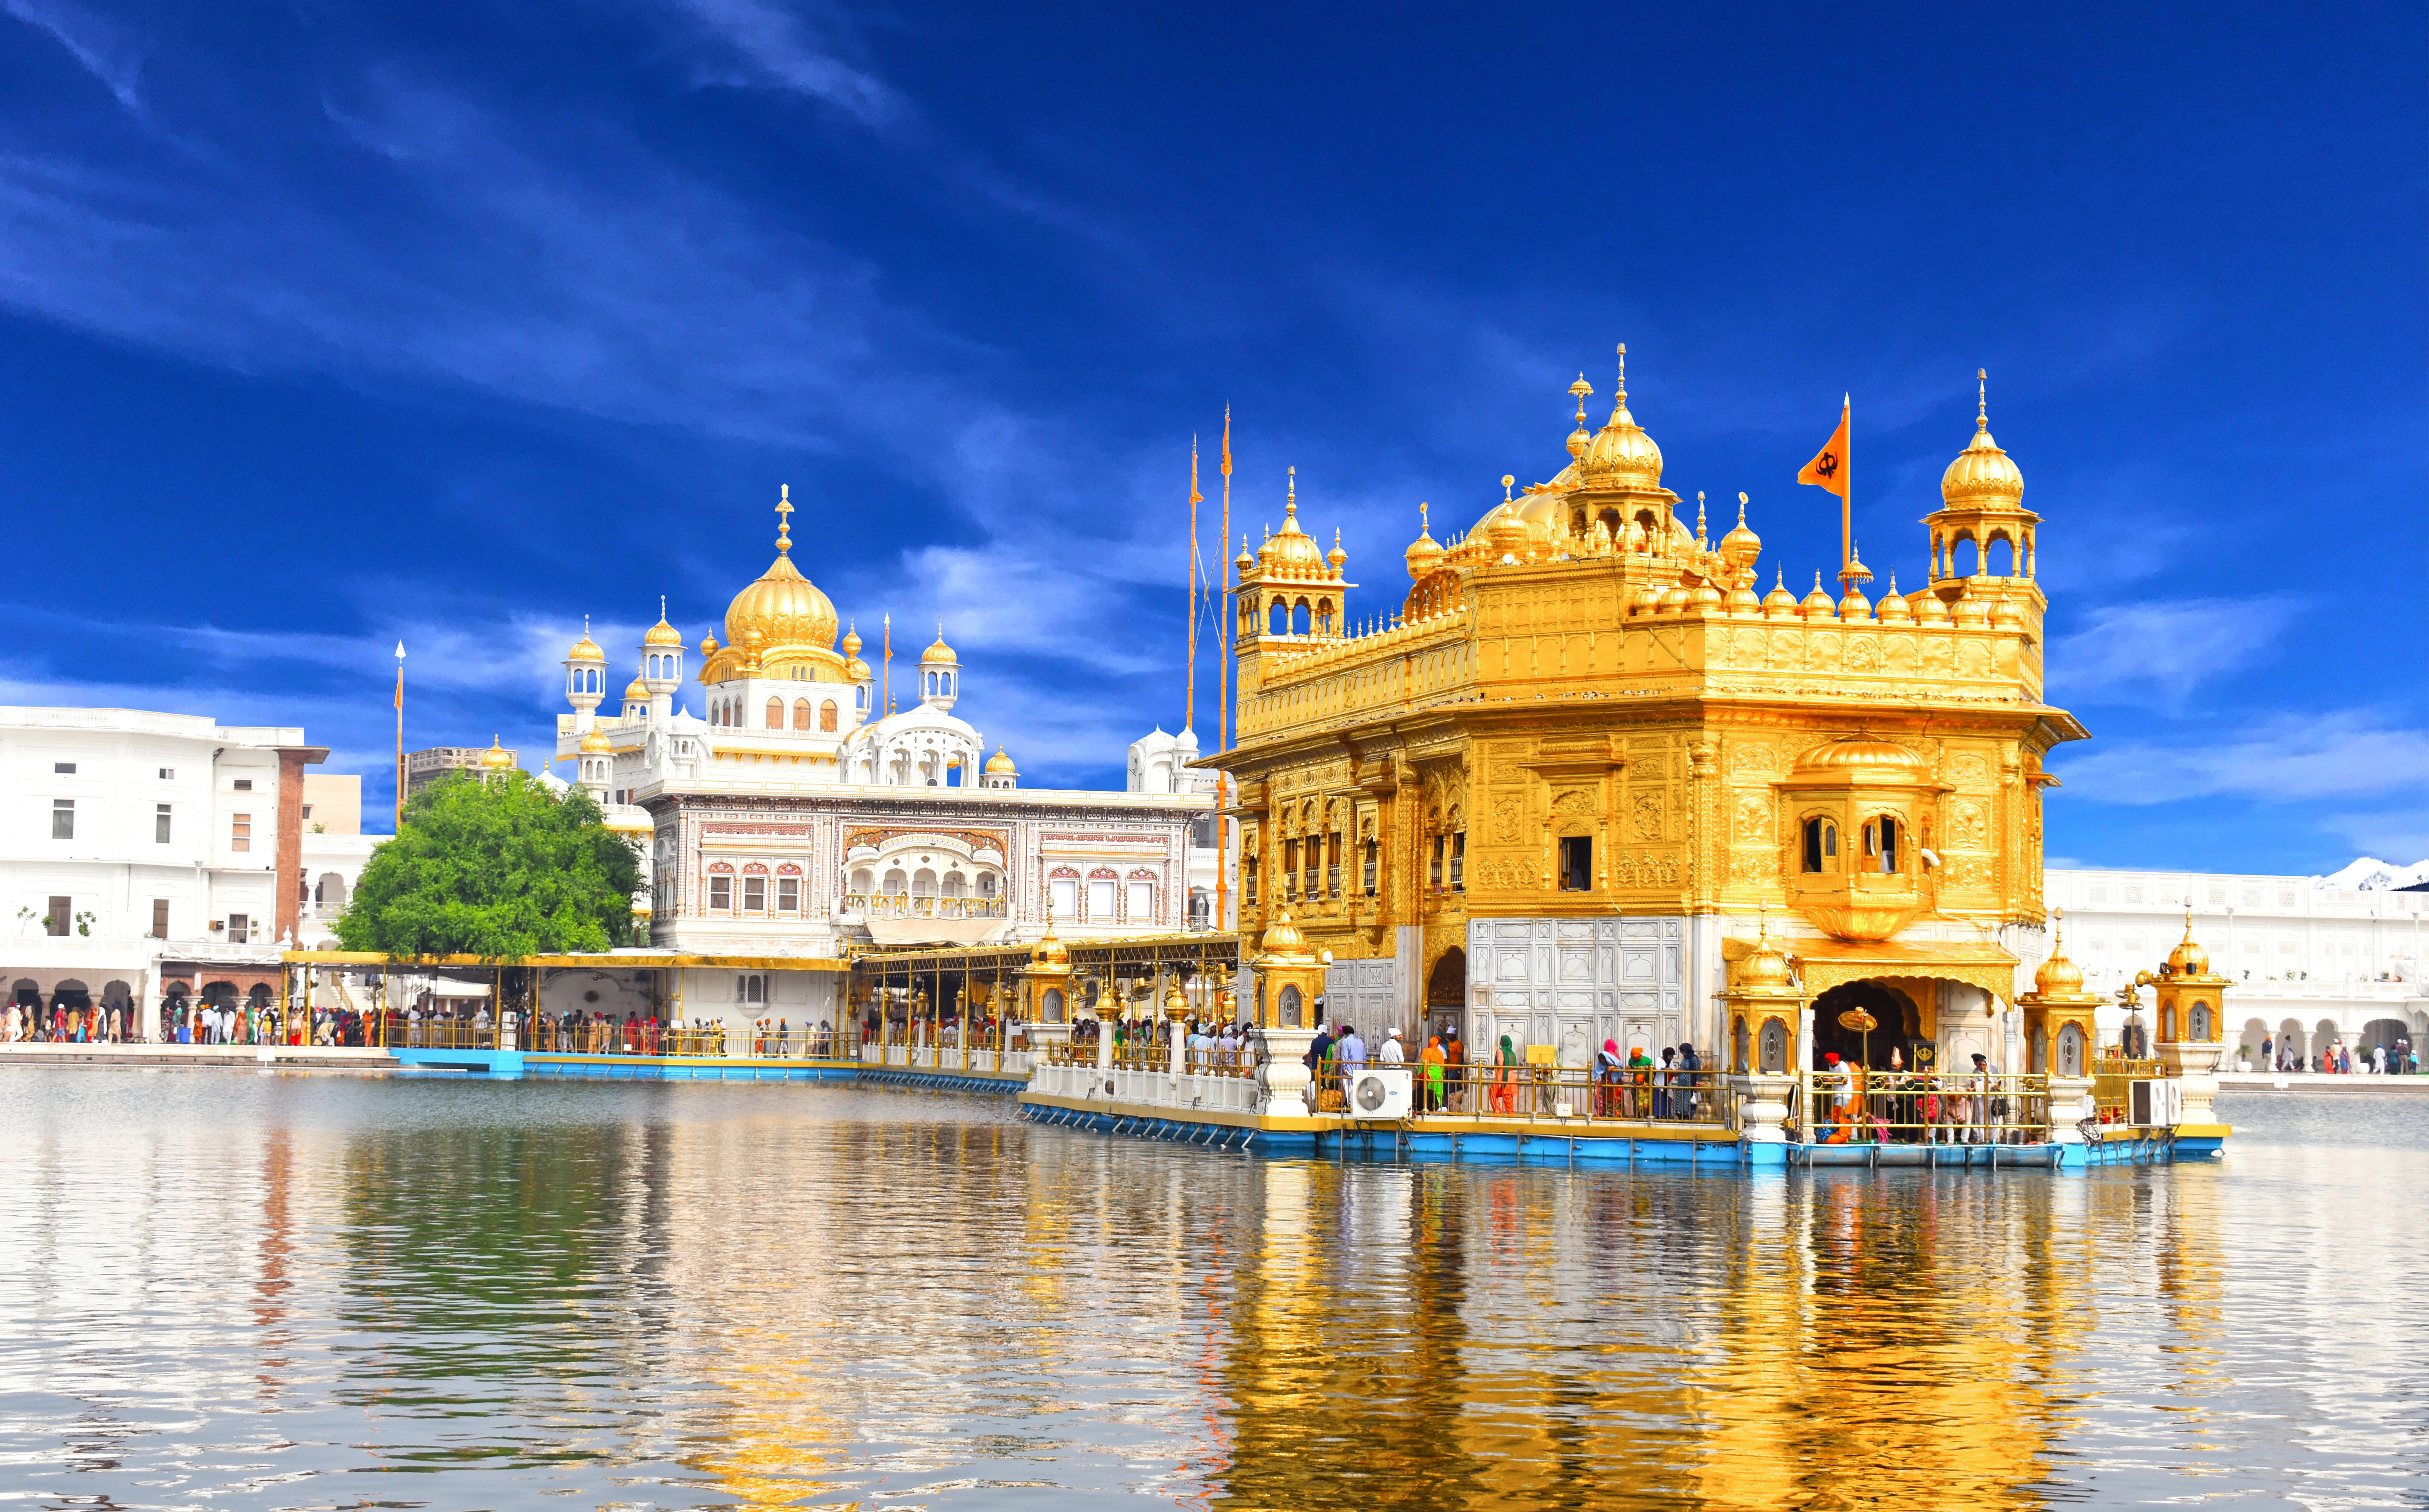 Start Amritsar City Tour by seeking blessings at the Golden Temple